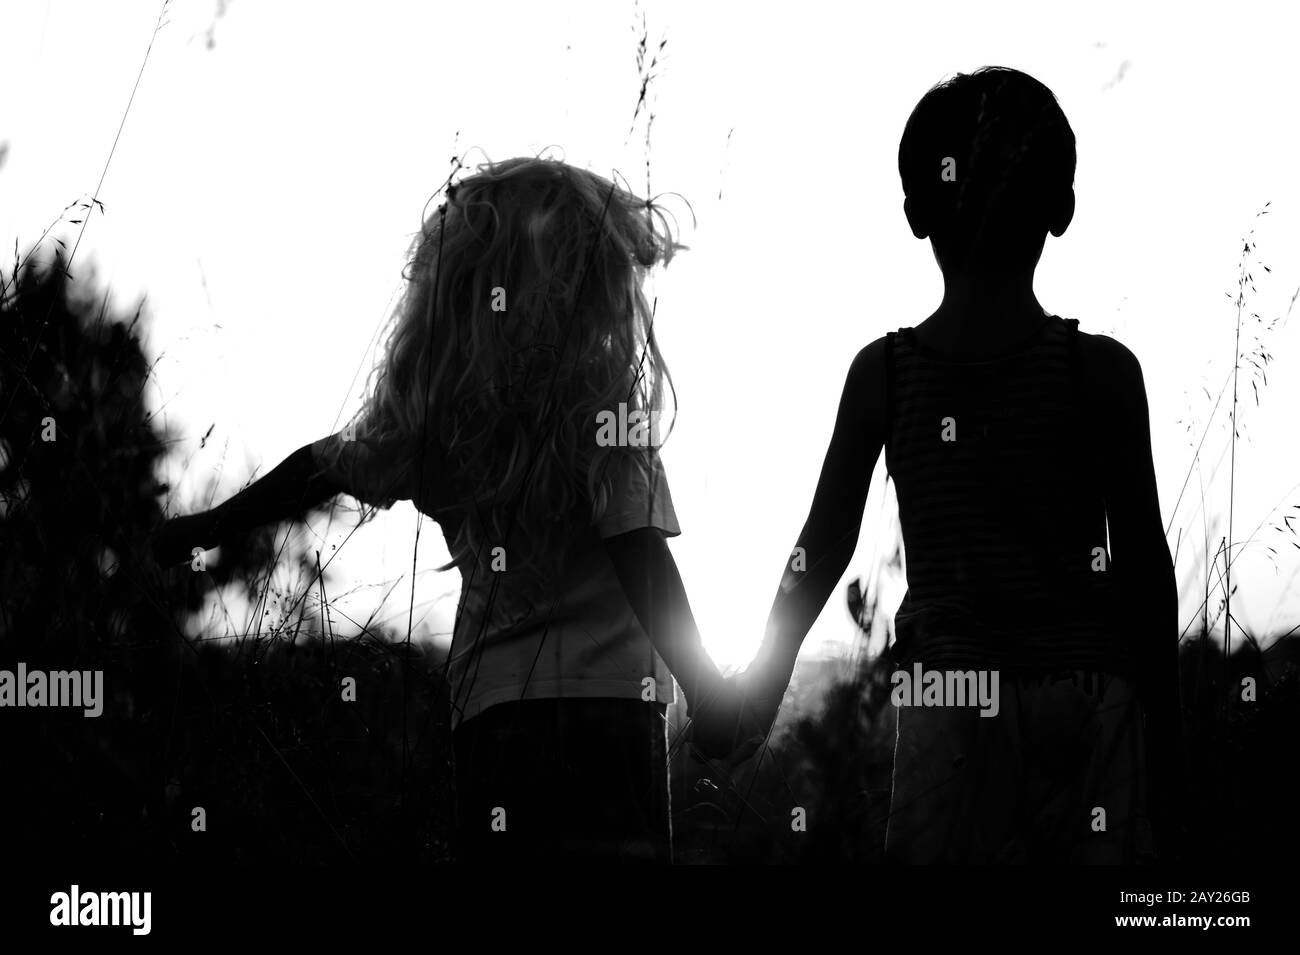 Boy And Girl Holding Hands Silhouette High Resolution Stock Photography And Images Alamy